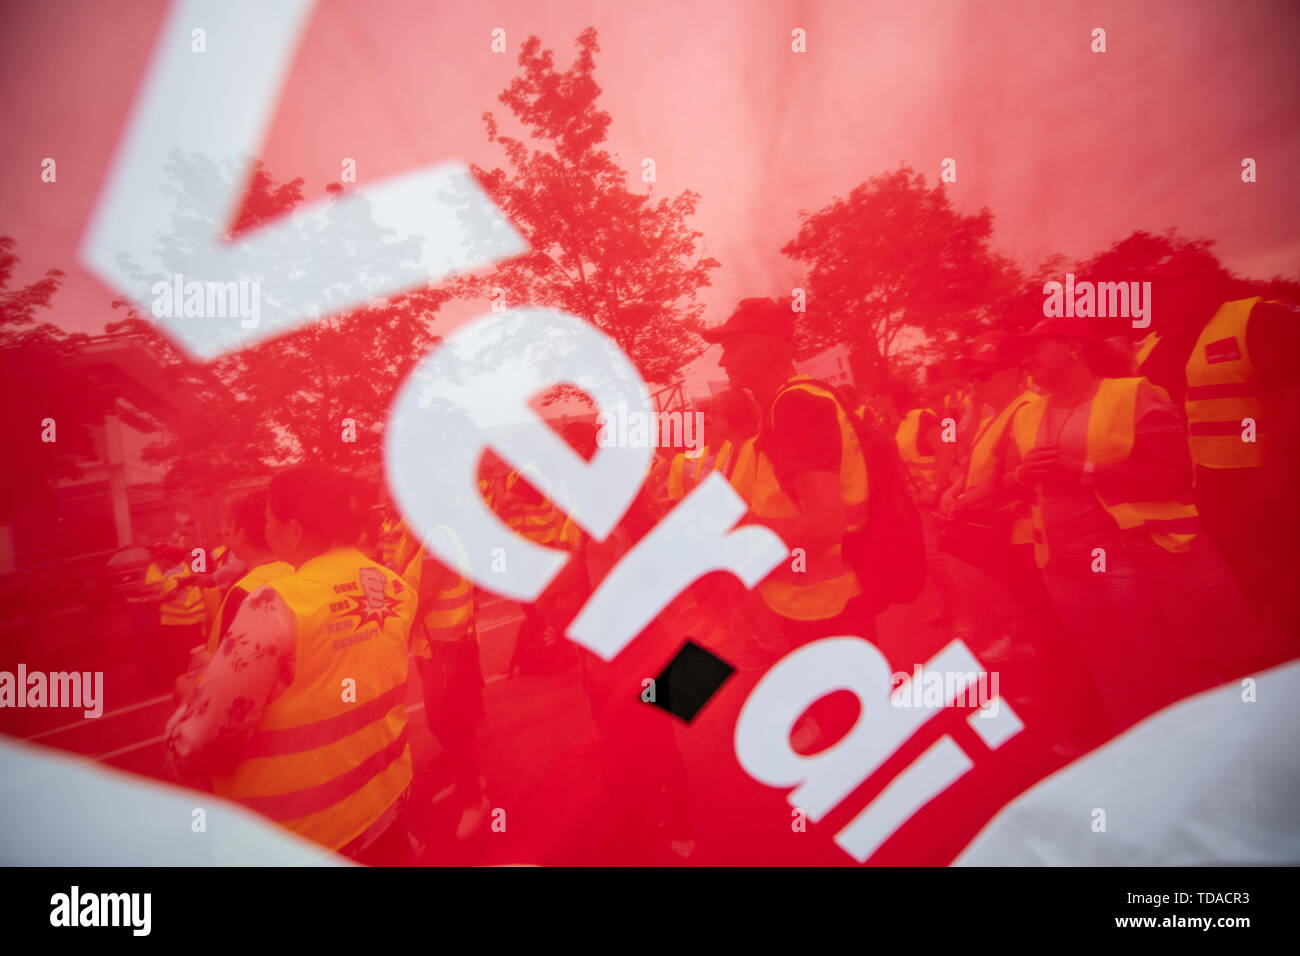 Neckarsulm, Germany. 14th June, 2019. Striking Kaufland employees stand in front of the group's headquarters in Neckarsulm. After the fruitless negotiations in the collective bargaining round for the retail sector, the Verdi trade union is calling for warning strikes at the Kaufland supermarket chain on Friday. Credit: Fabian Sommer/dpa/Alamy Live News Stock Photo